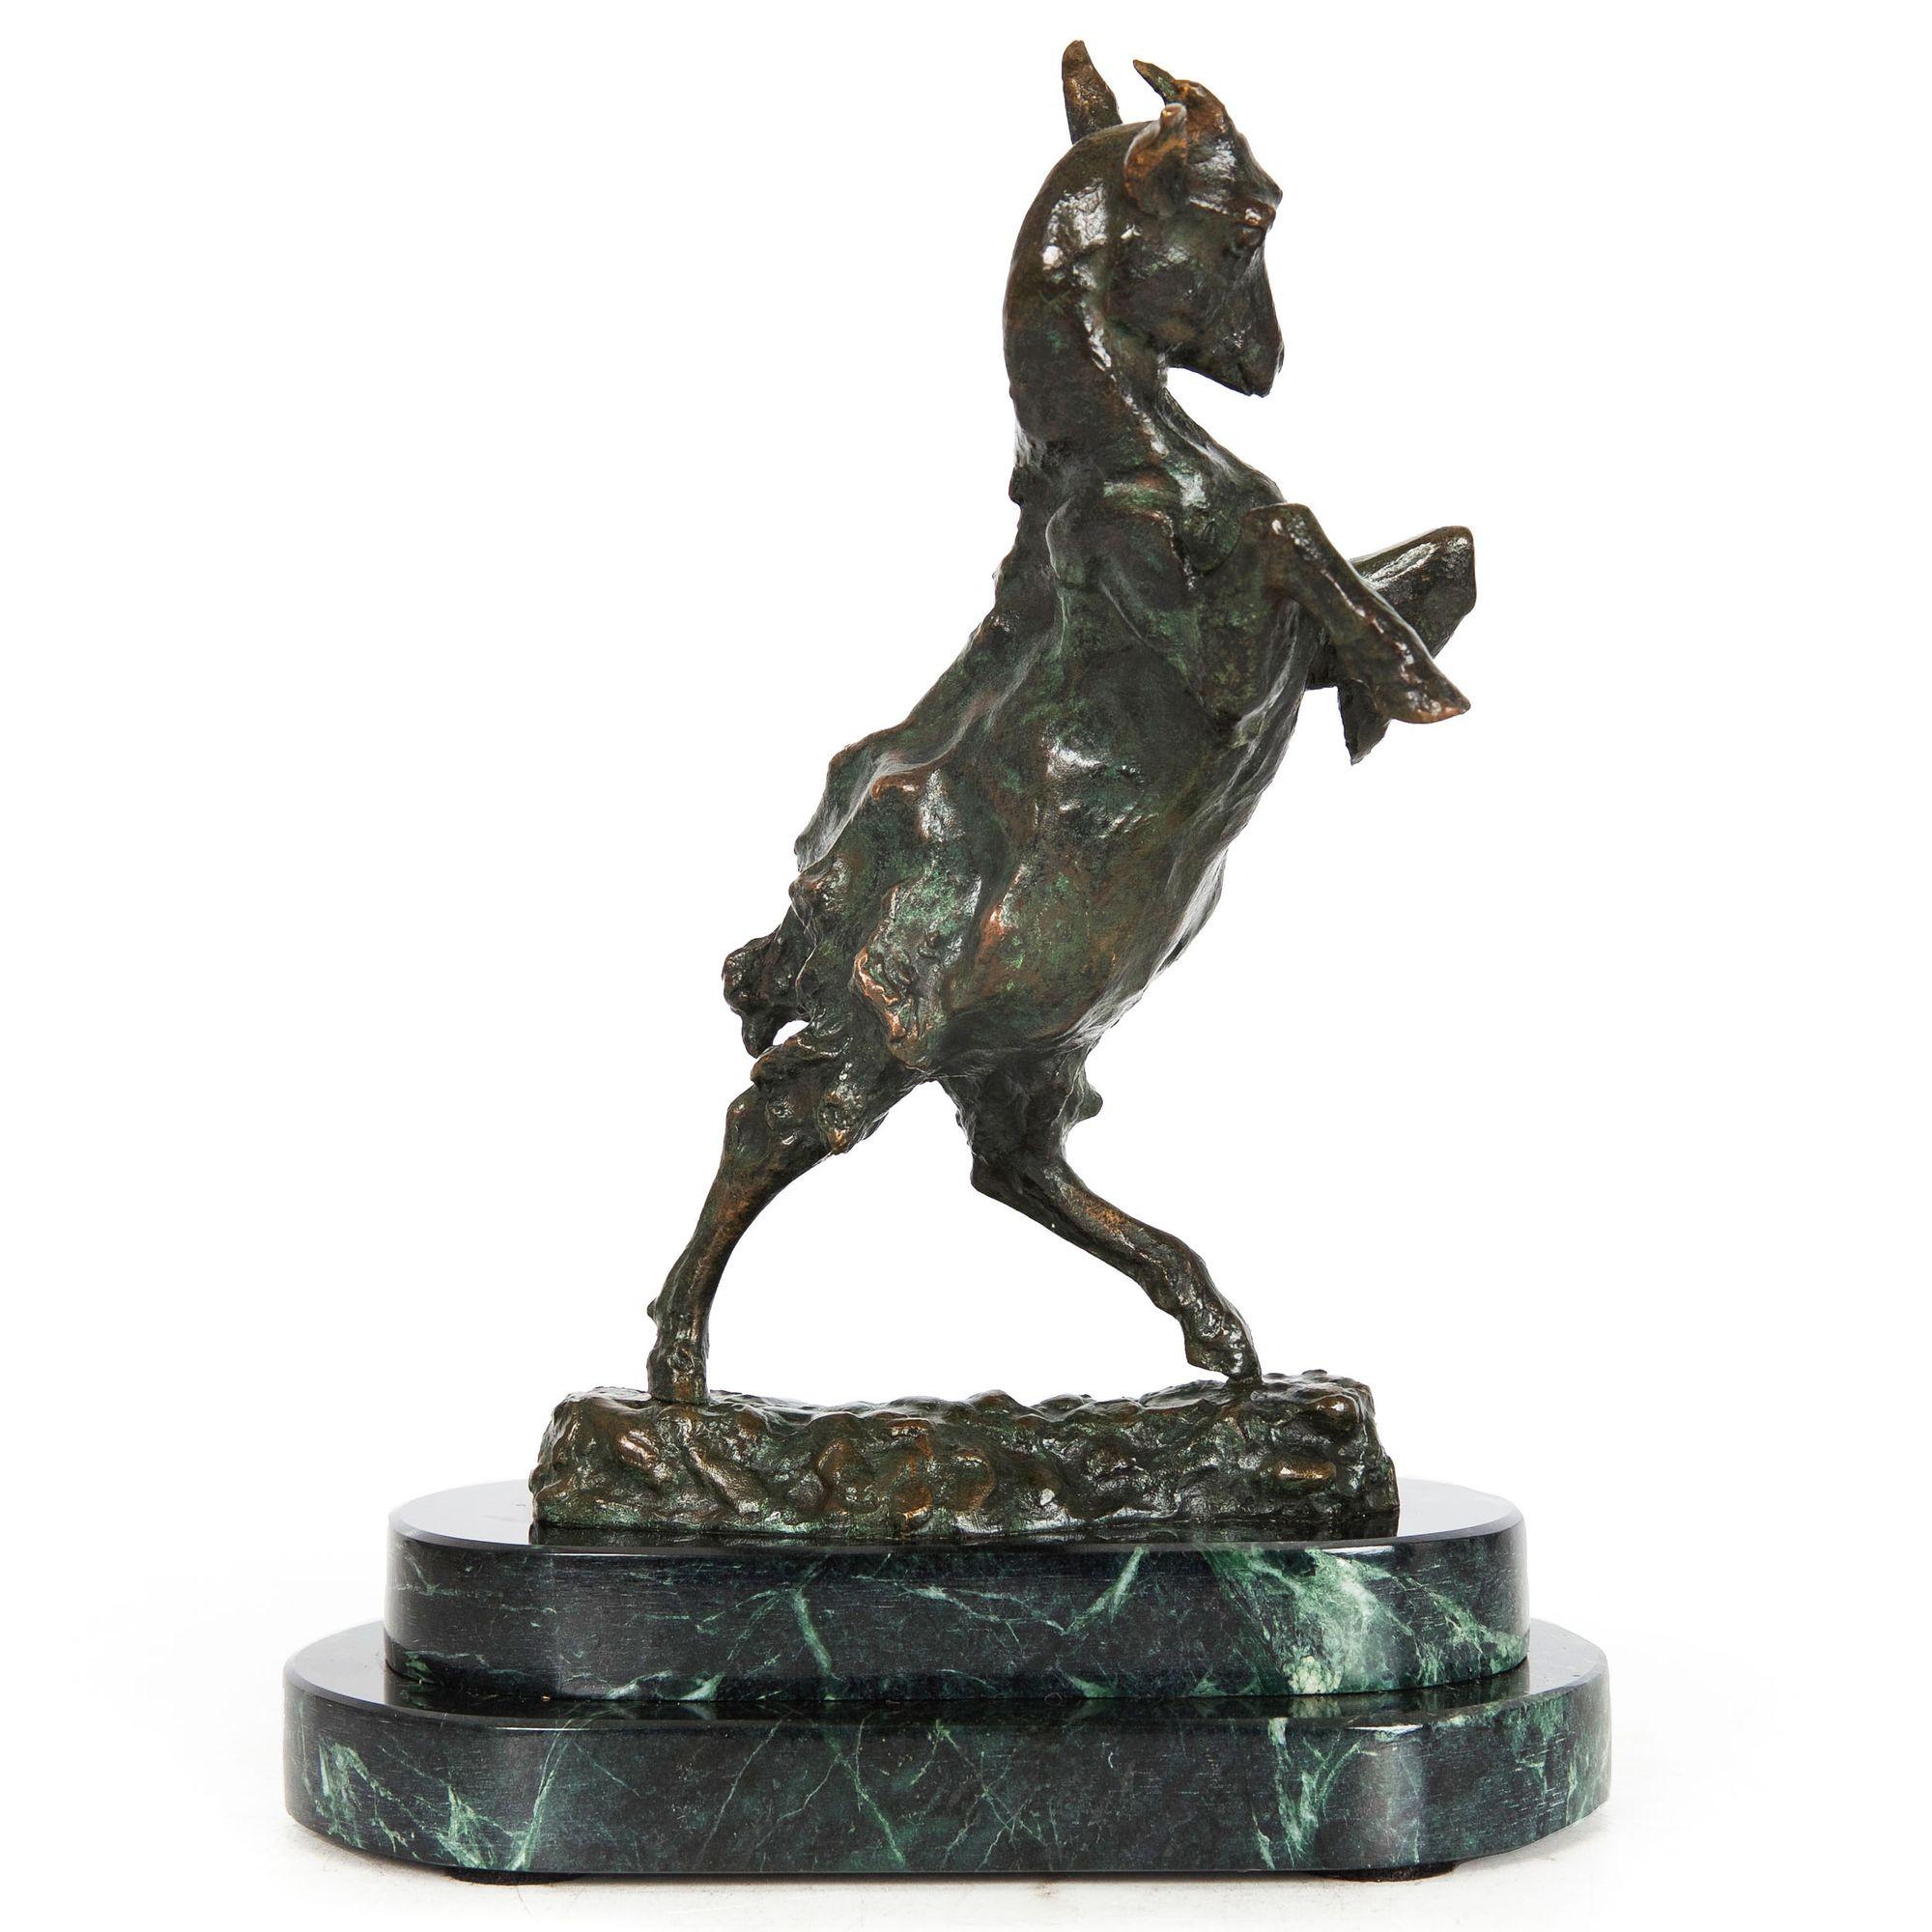 A very nice modeling of a young goat rooted on its backlegs as its body spins in the air, raising its hooves and lowering its head in that familiar playful jumping dance. Designed as a bookend and generally offered in pairs, the present example is a